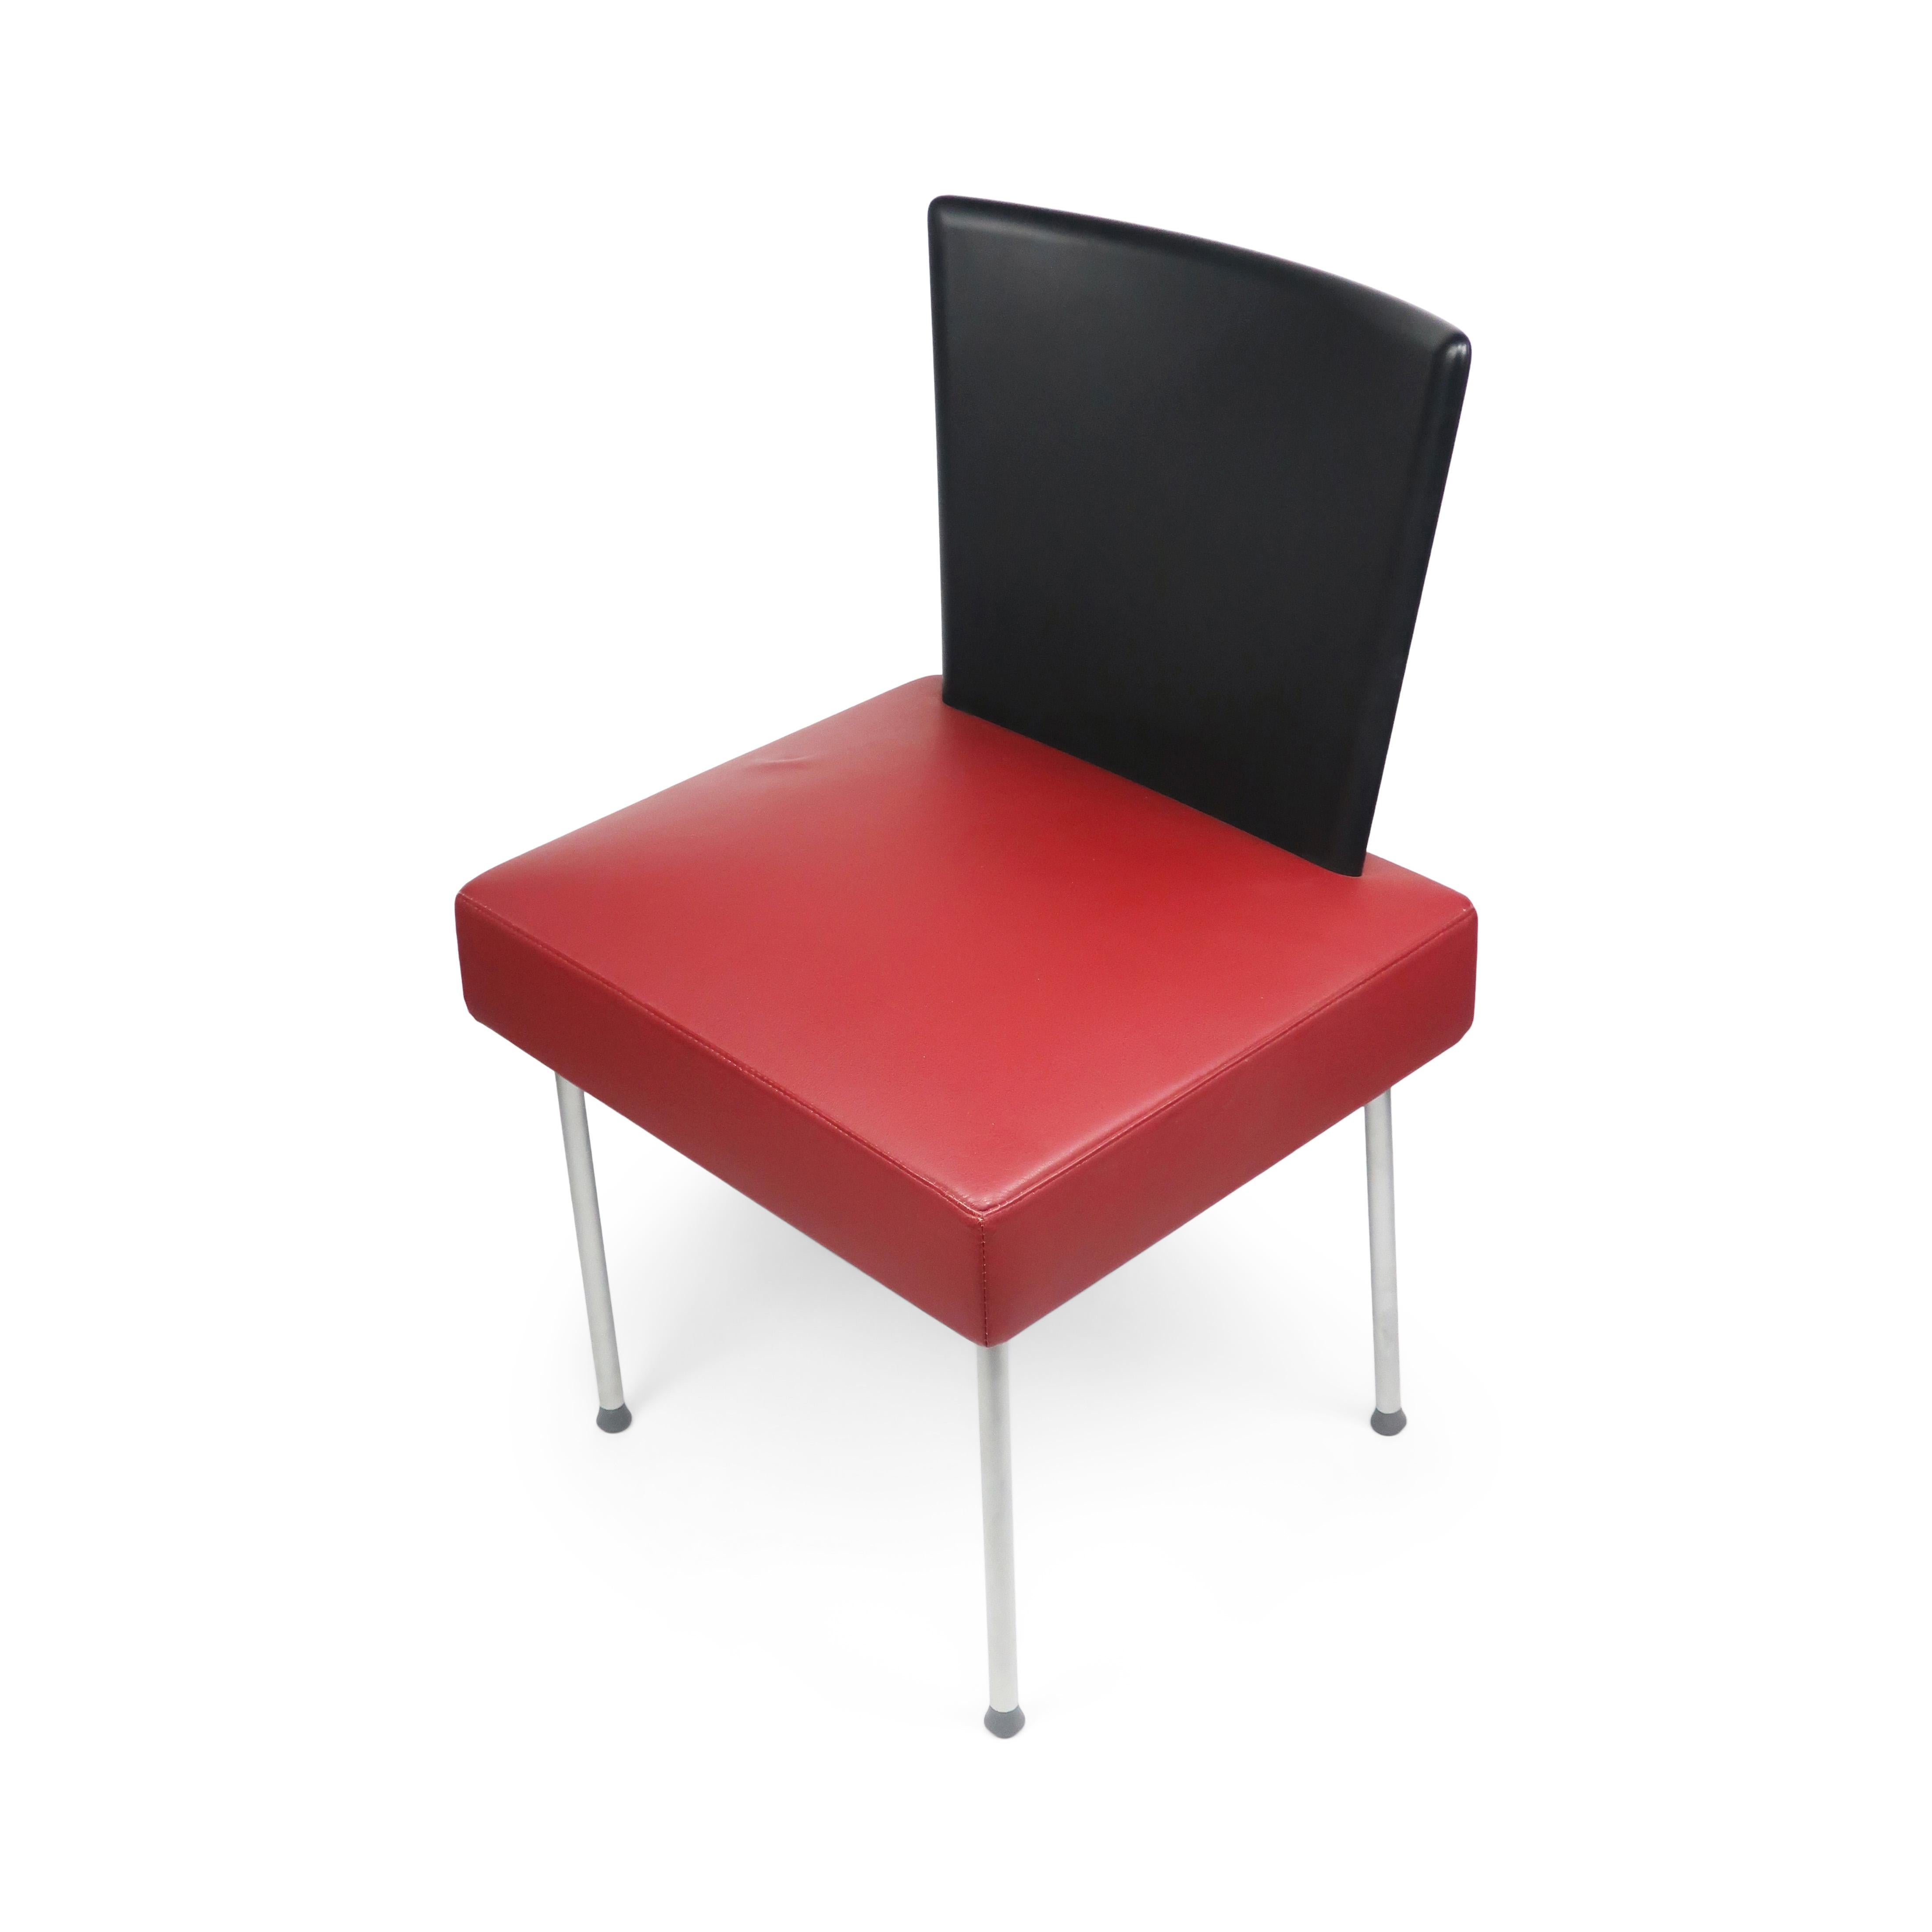 A stunning Calvi chair with a square maroon leather seat, black plastic back, and slender silver metal legs designed by Gijs Papavoine in 1997 for Montis, a Dutch manufacturer. Perfectly fits the aesthetic of mid-1990s design and furniture. 

In